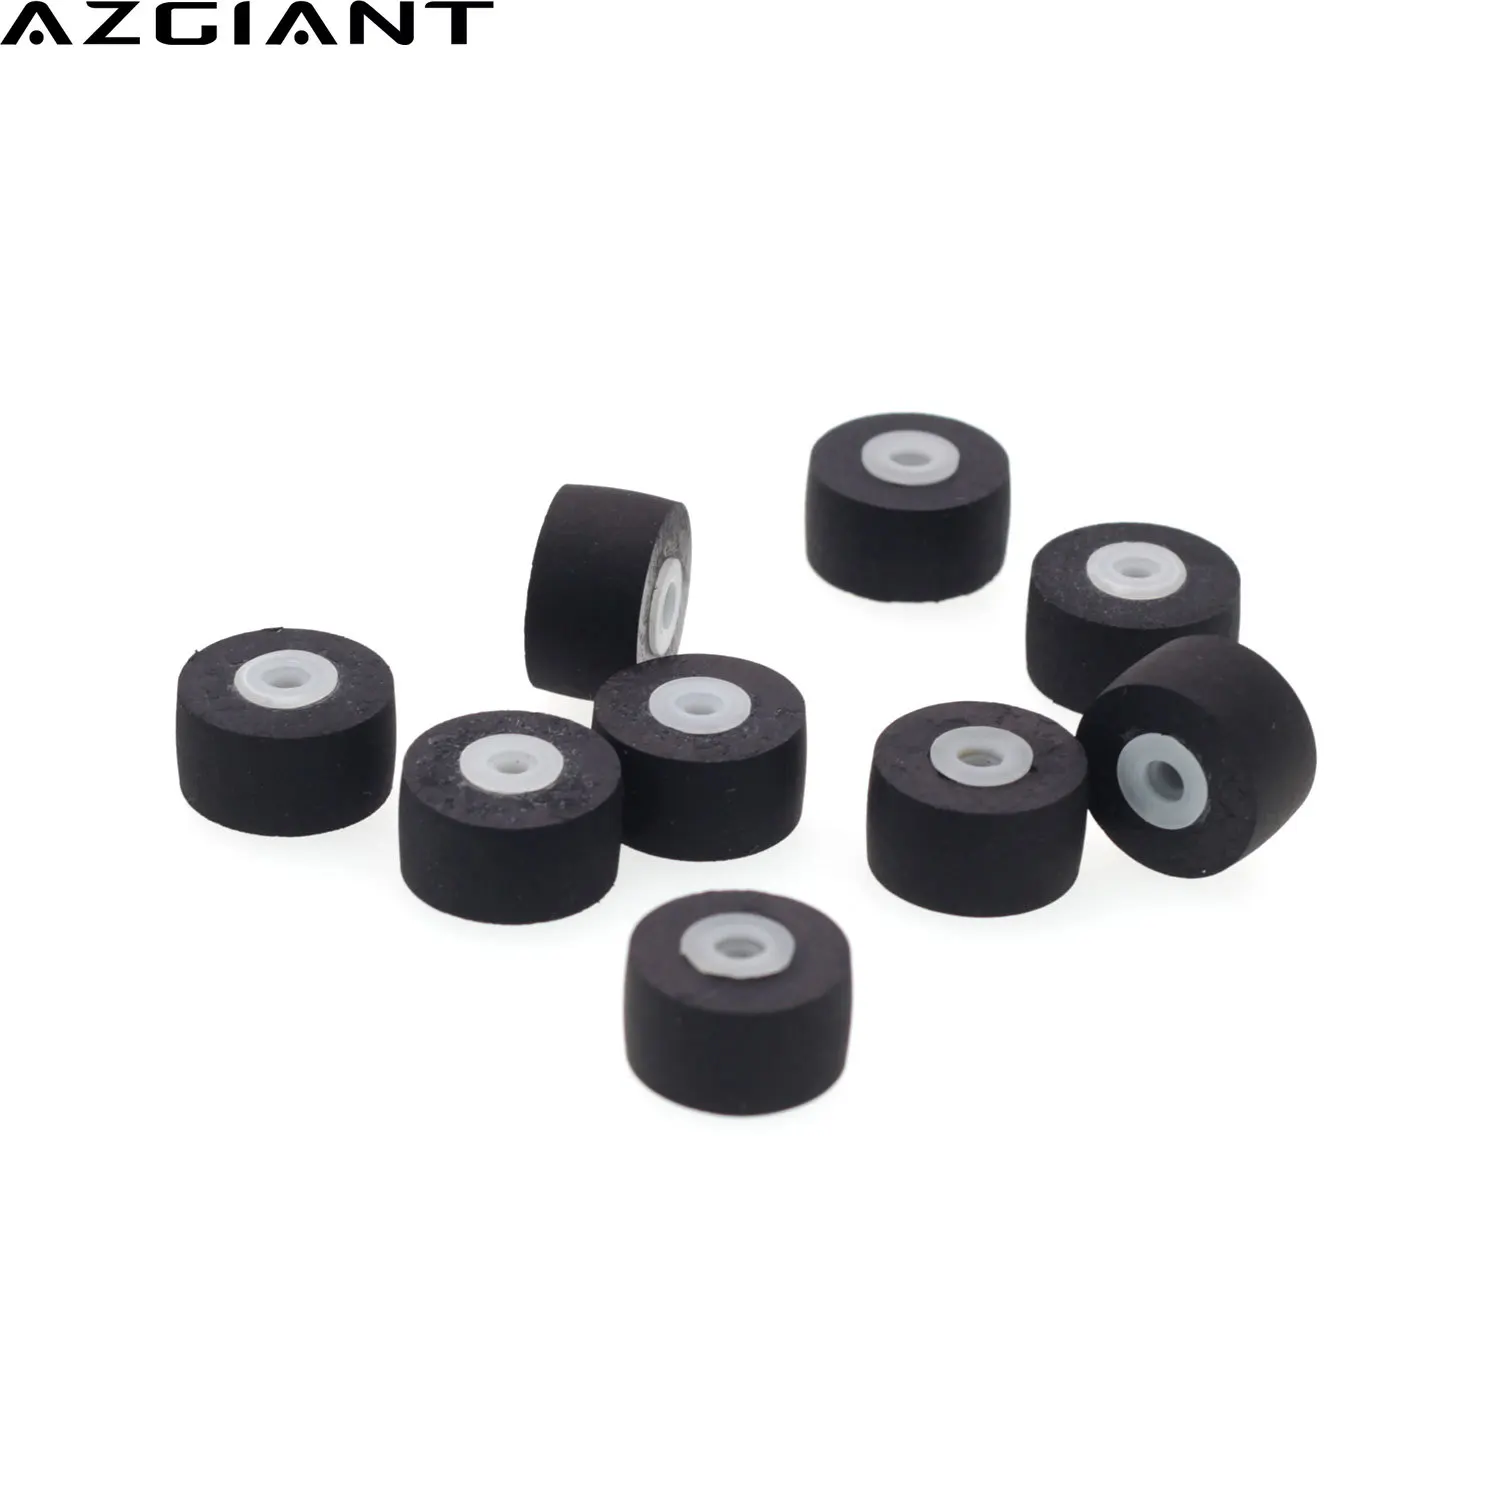 10pc 13x8x2mm Card Seat Audio Belt Pulley Tape Recorder Belt Pulley Wheel Amplifiers Pinch Roller Deck for SONY K850ES TEAC Akai